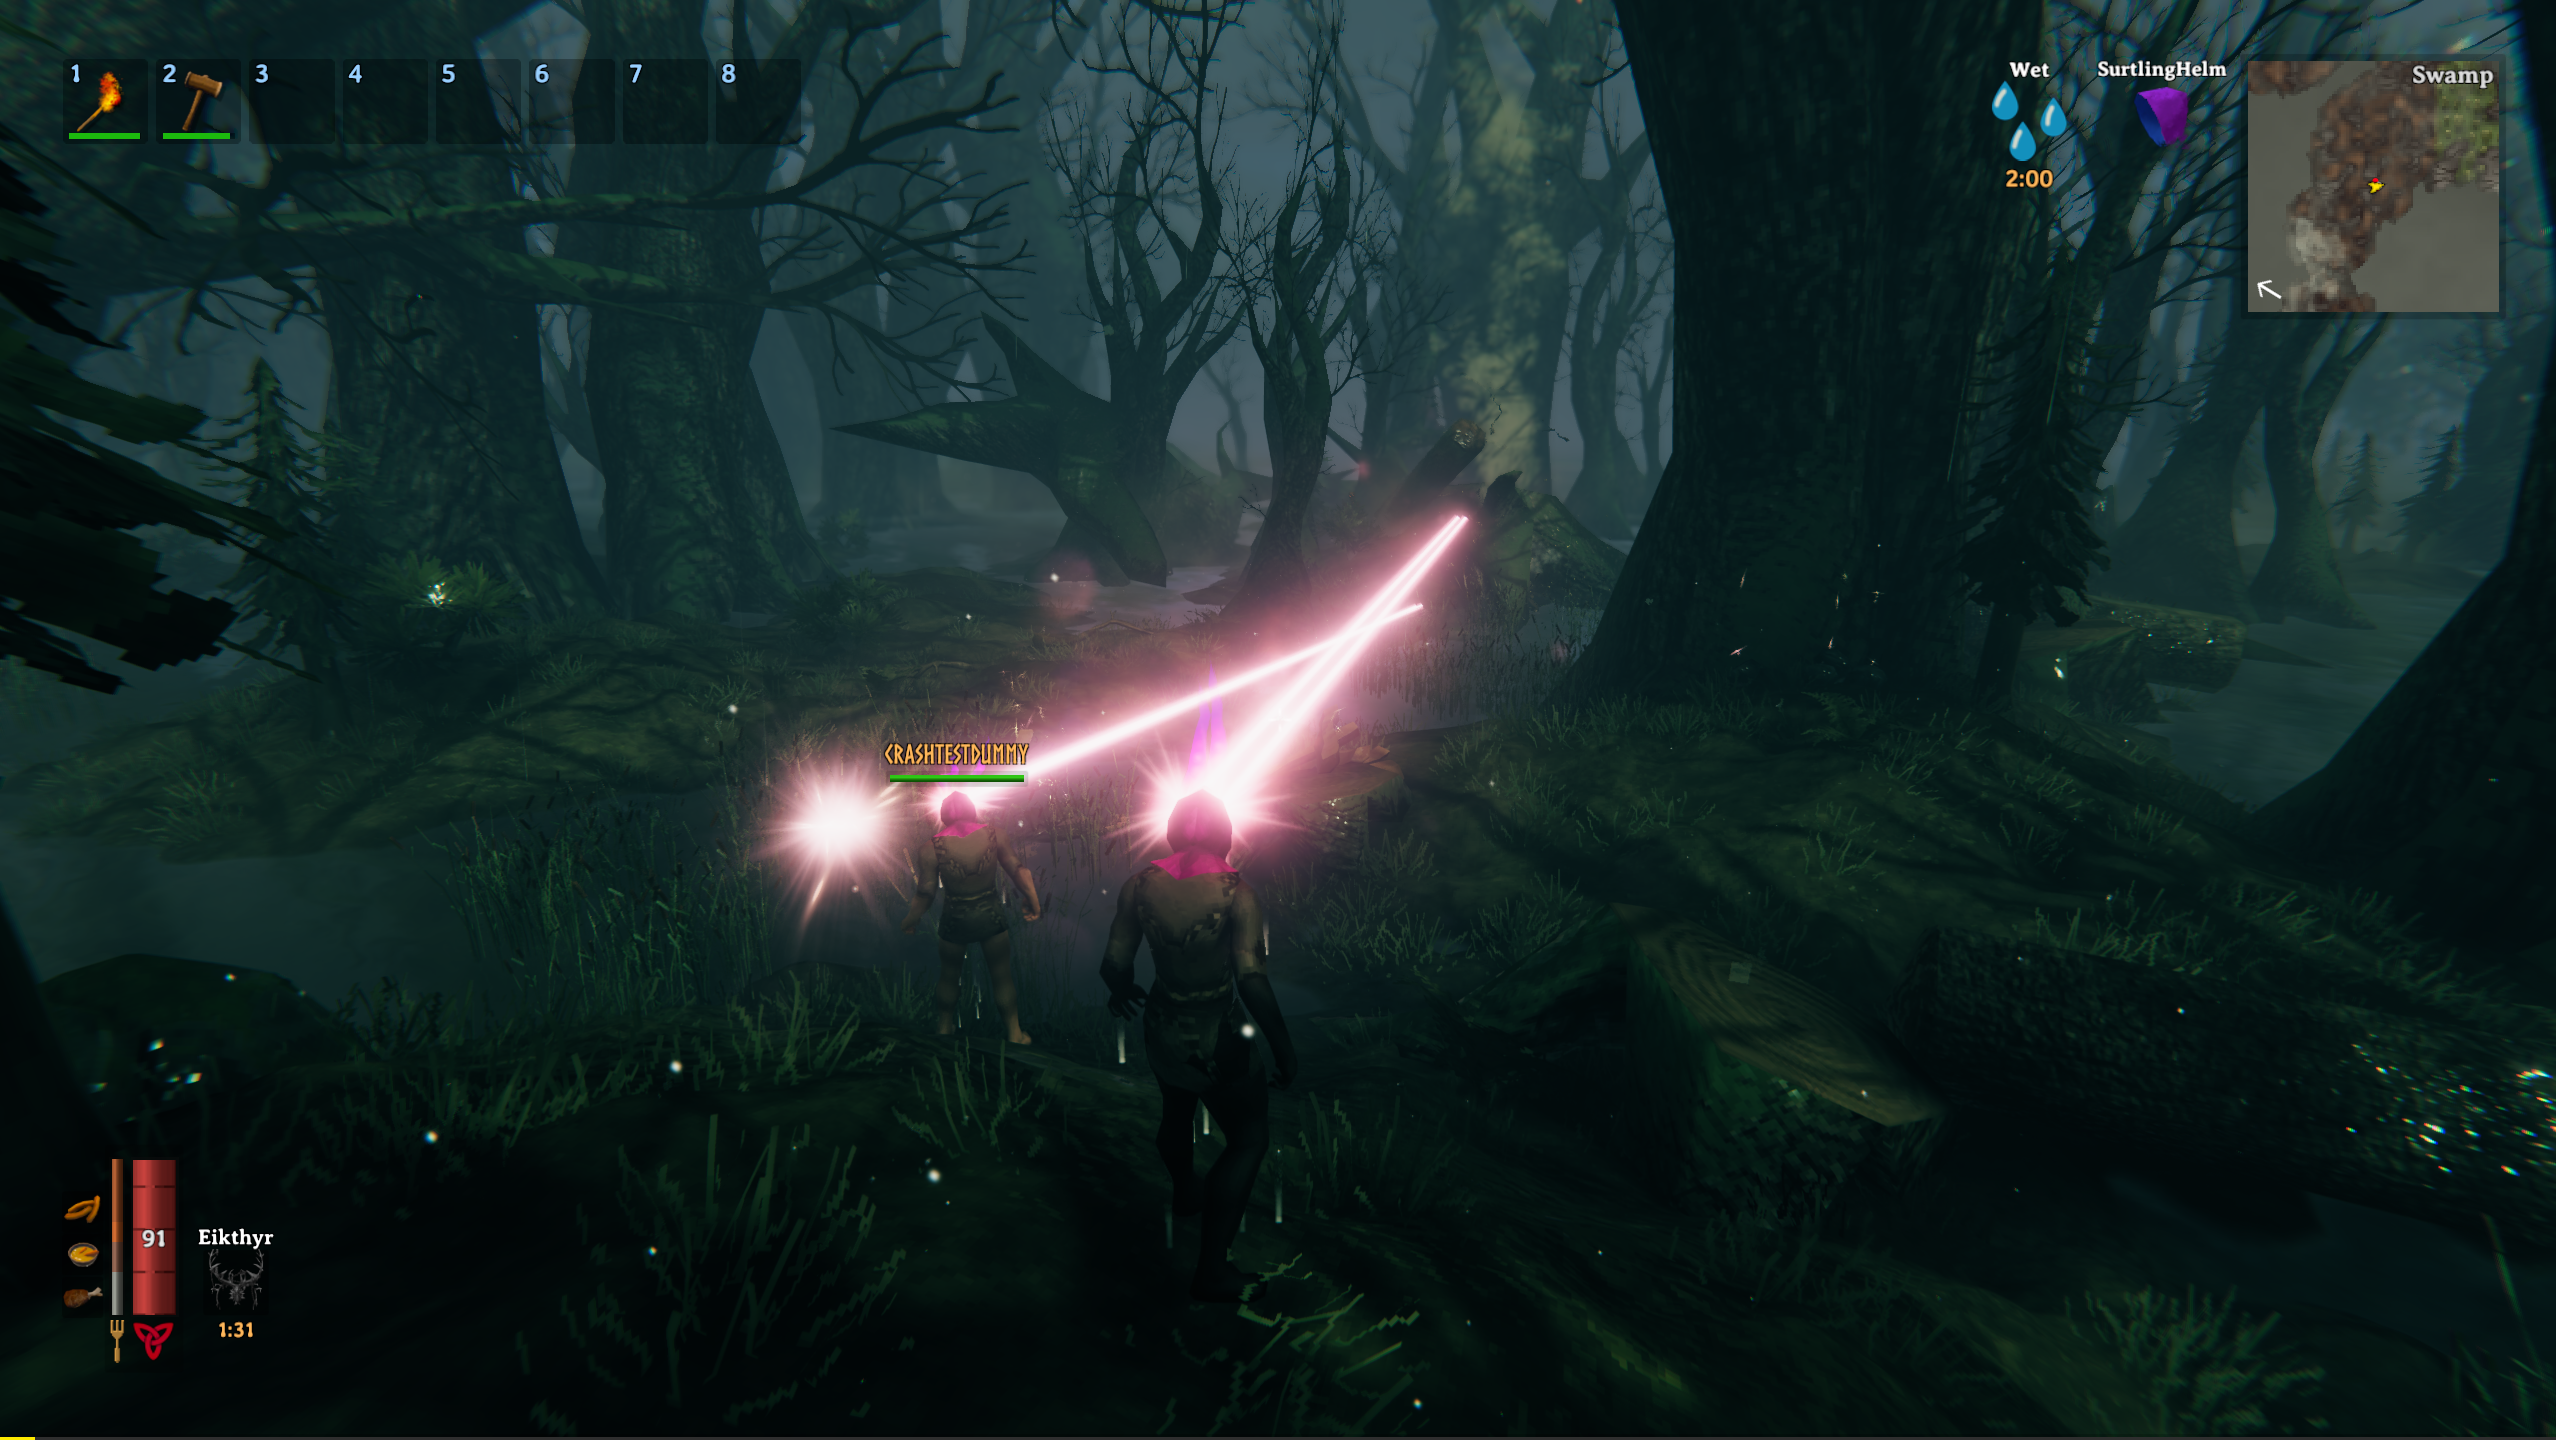 Two incredibly cool vikings with glowing helms lasering down enemies in a swamp